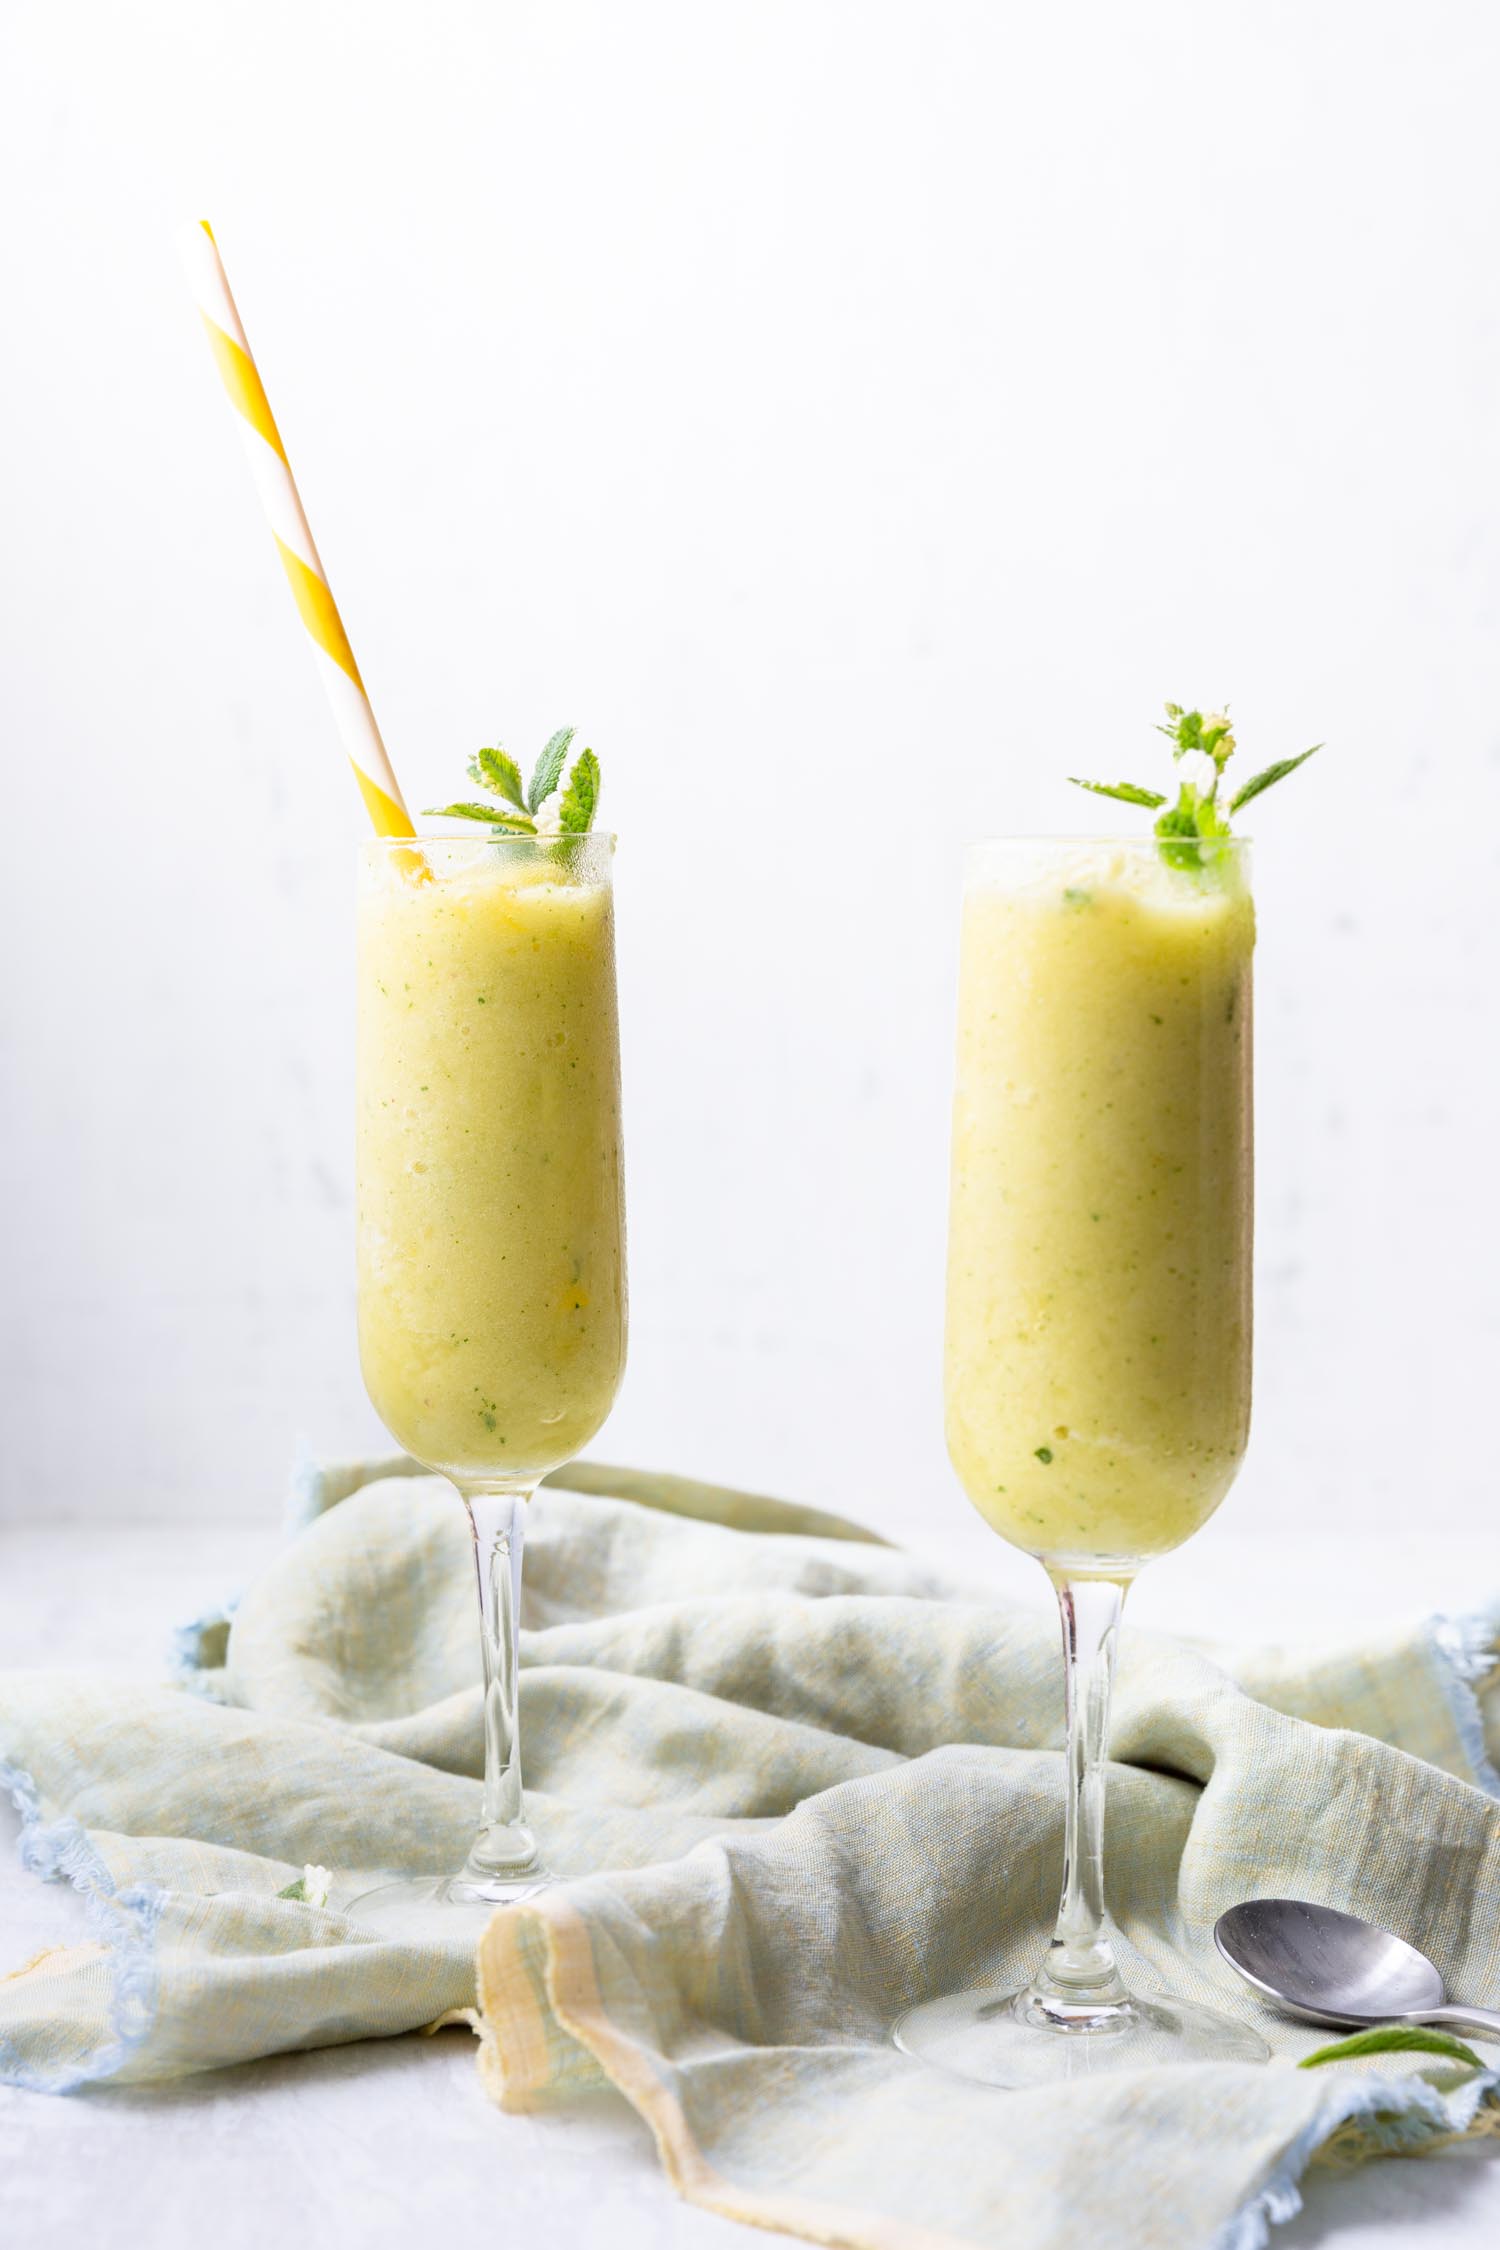 Pineapple Mint Frozen Drinks require just two ingredients (+ water) for a delicious and refreshing mocktail - add your favorite spirits for the ideal summery cocktail. #summerdrink #summercocktail #cocktail #pineapple #pineapplemintrecipe #drinkrecipe #frozendrink #blended #mocktail #fruitydrink #tropicaldrink #mojito